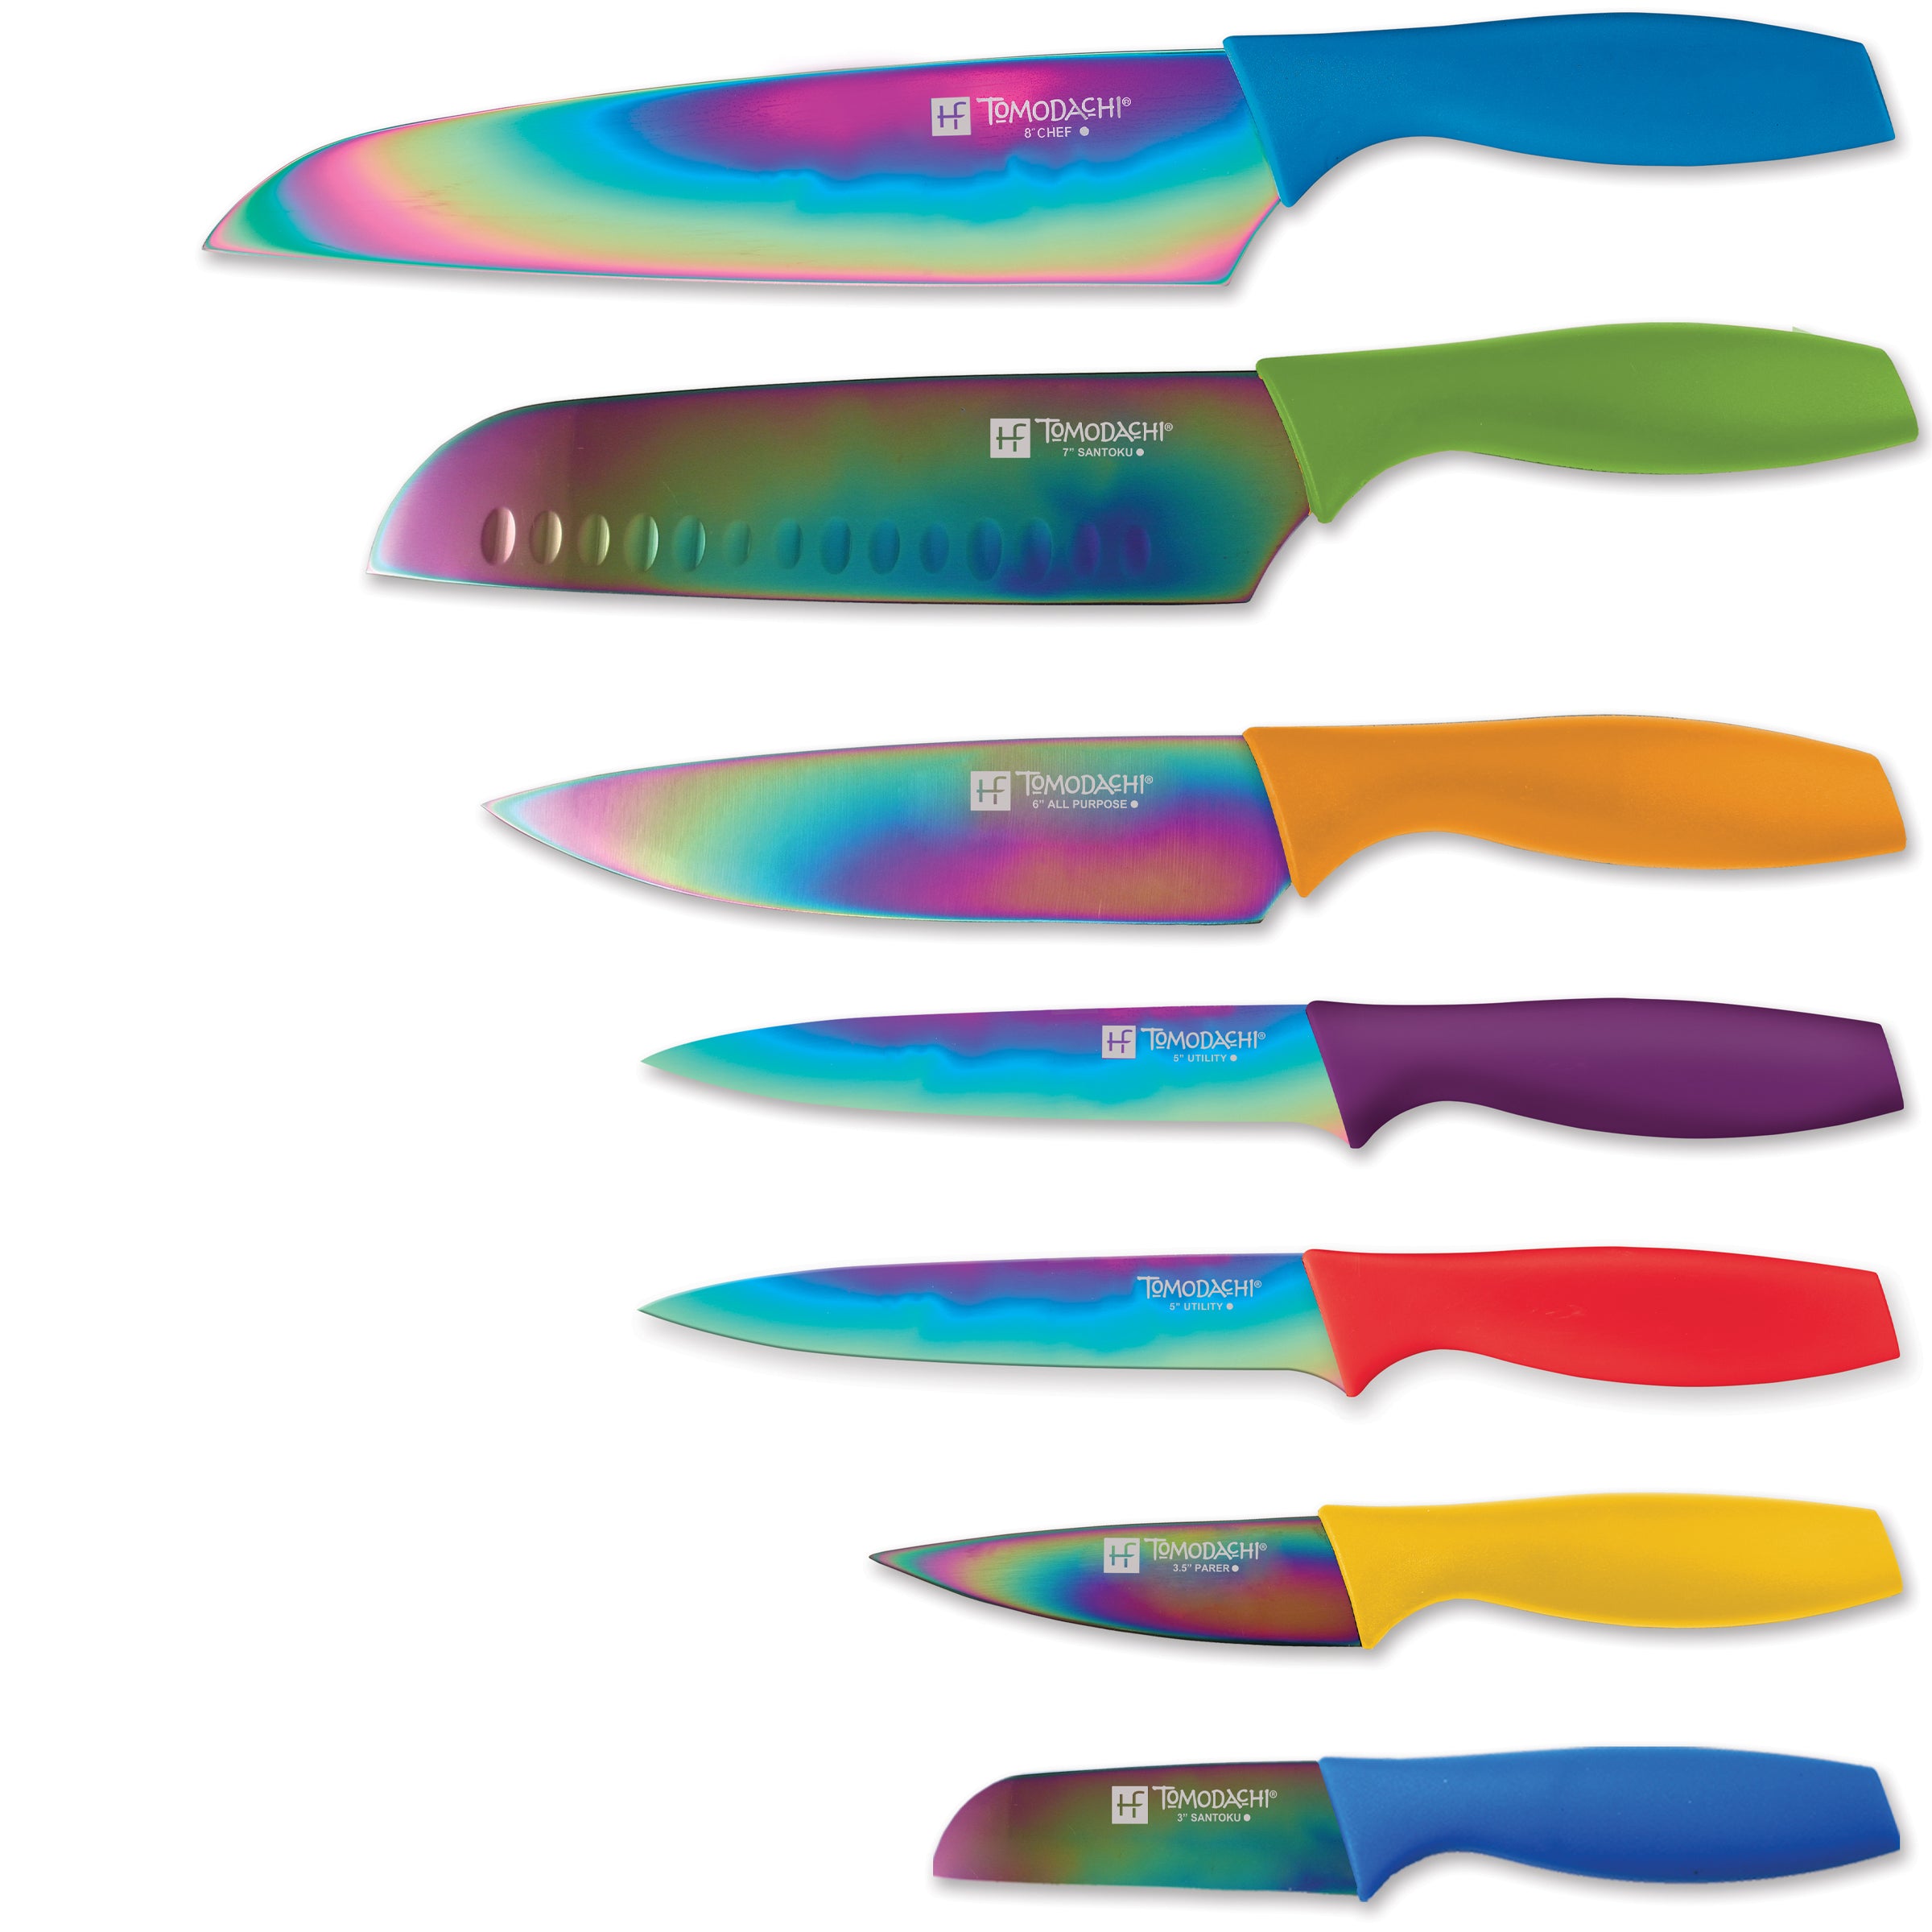 Set of 8, 5 and 3.5 Steel Blade Knives with Sheathes - Vision Forward